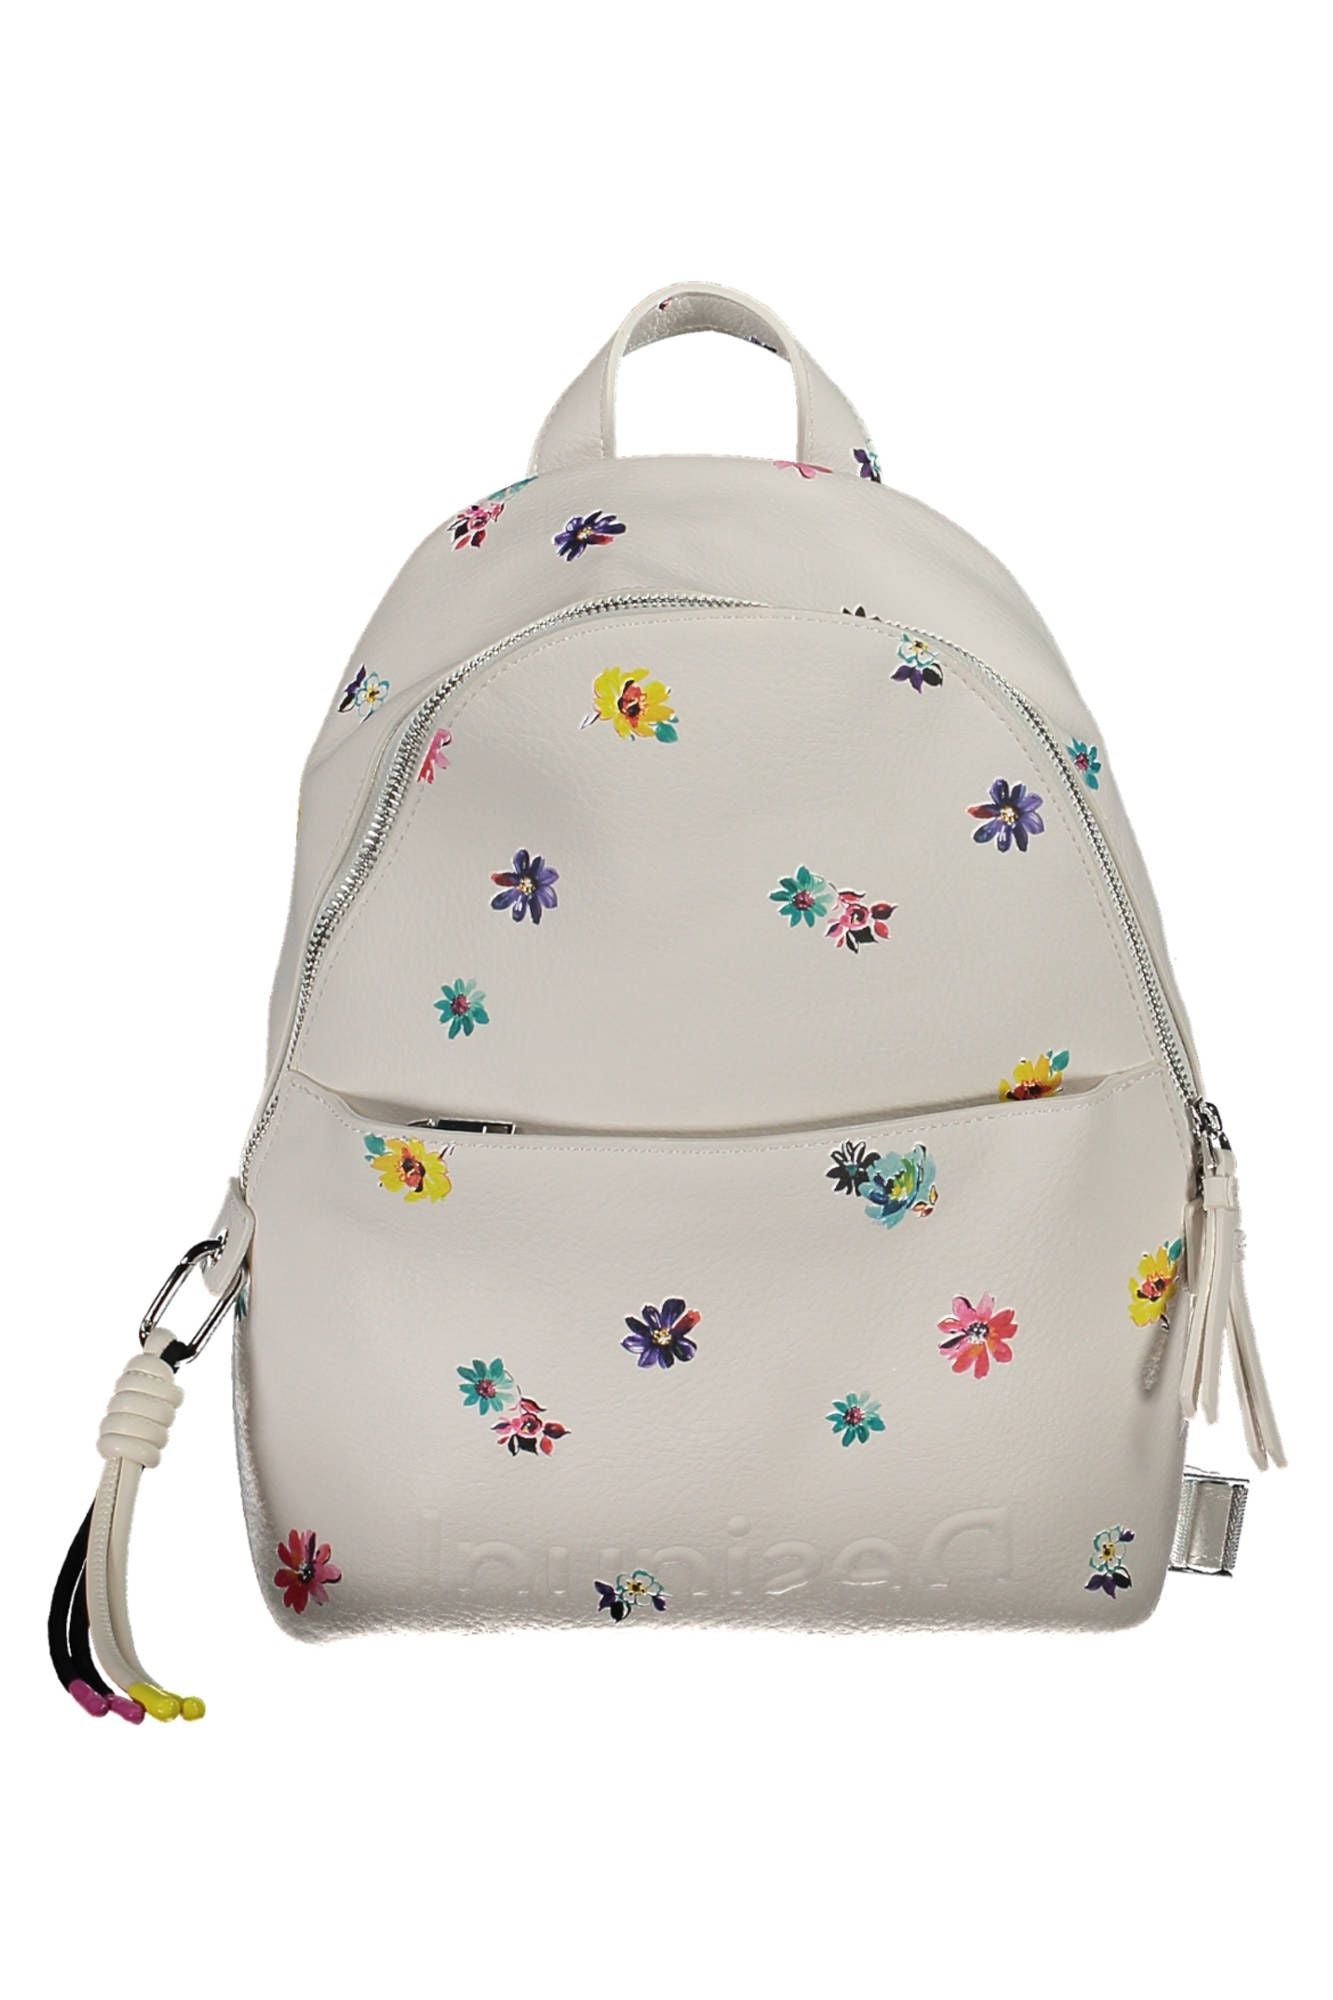 Chic White Backpack with Contrasting Details